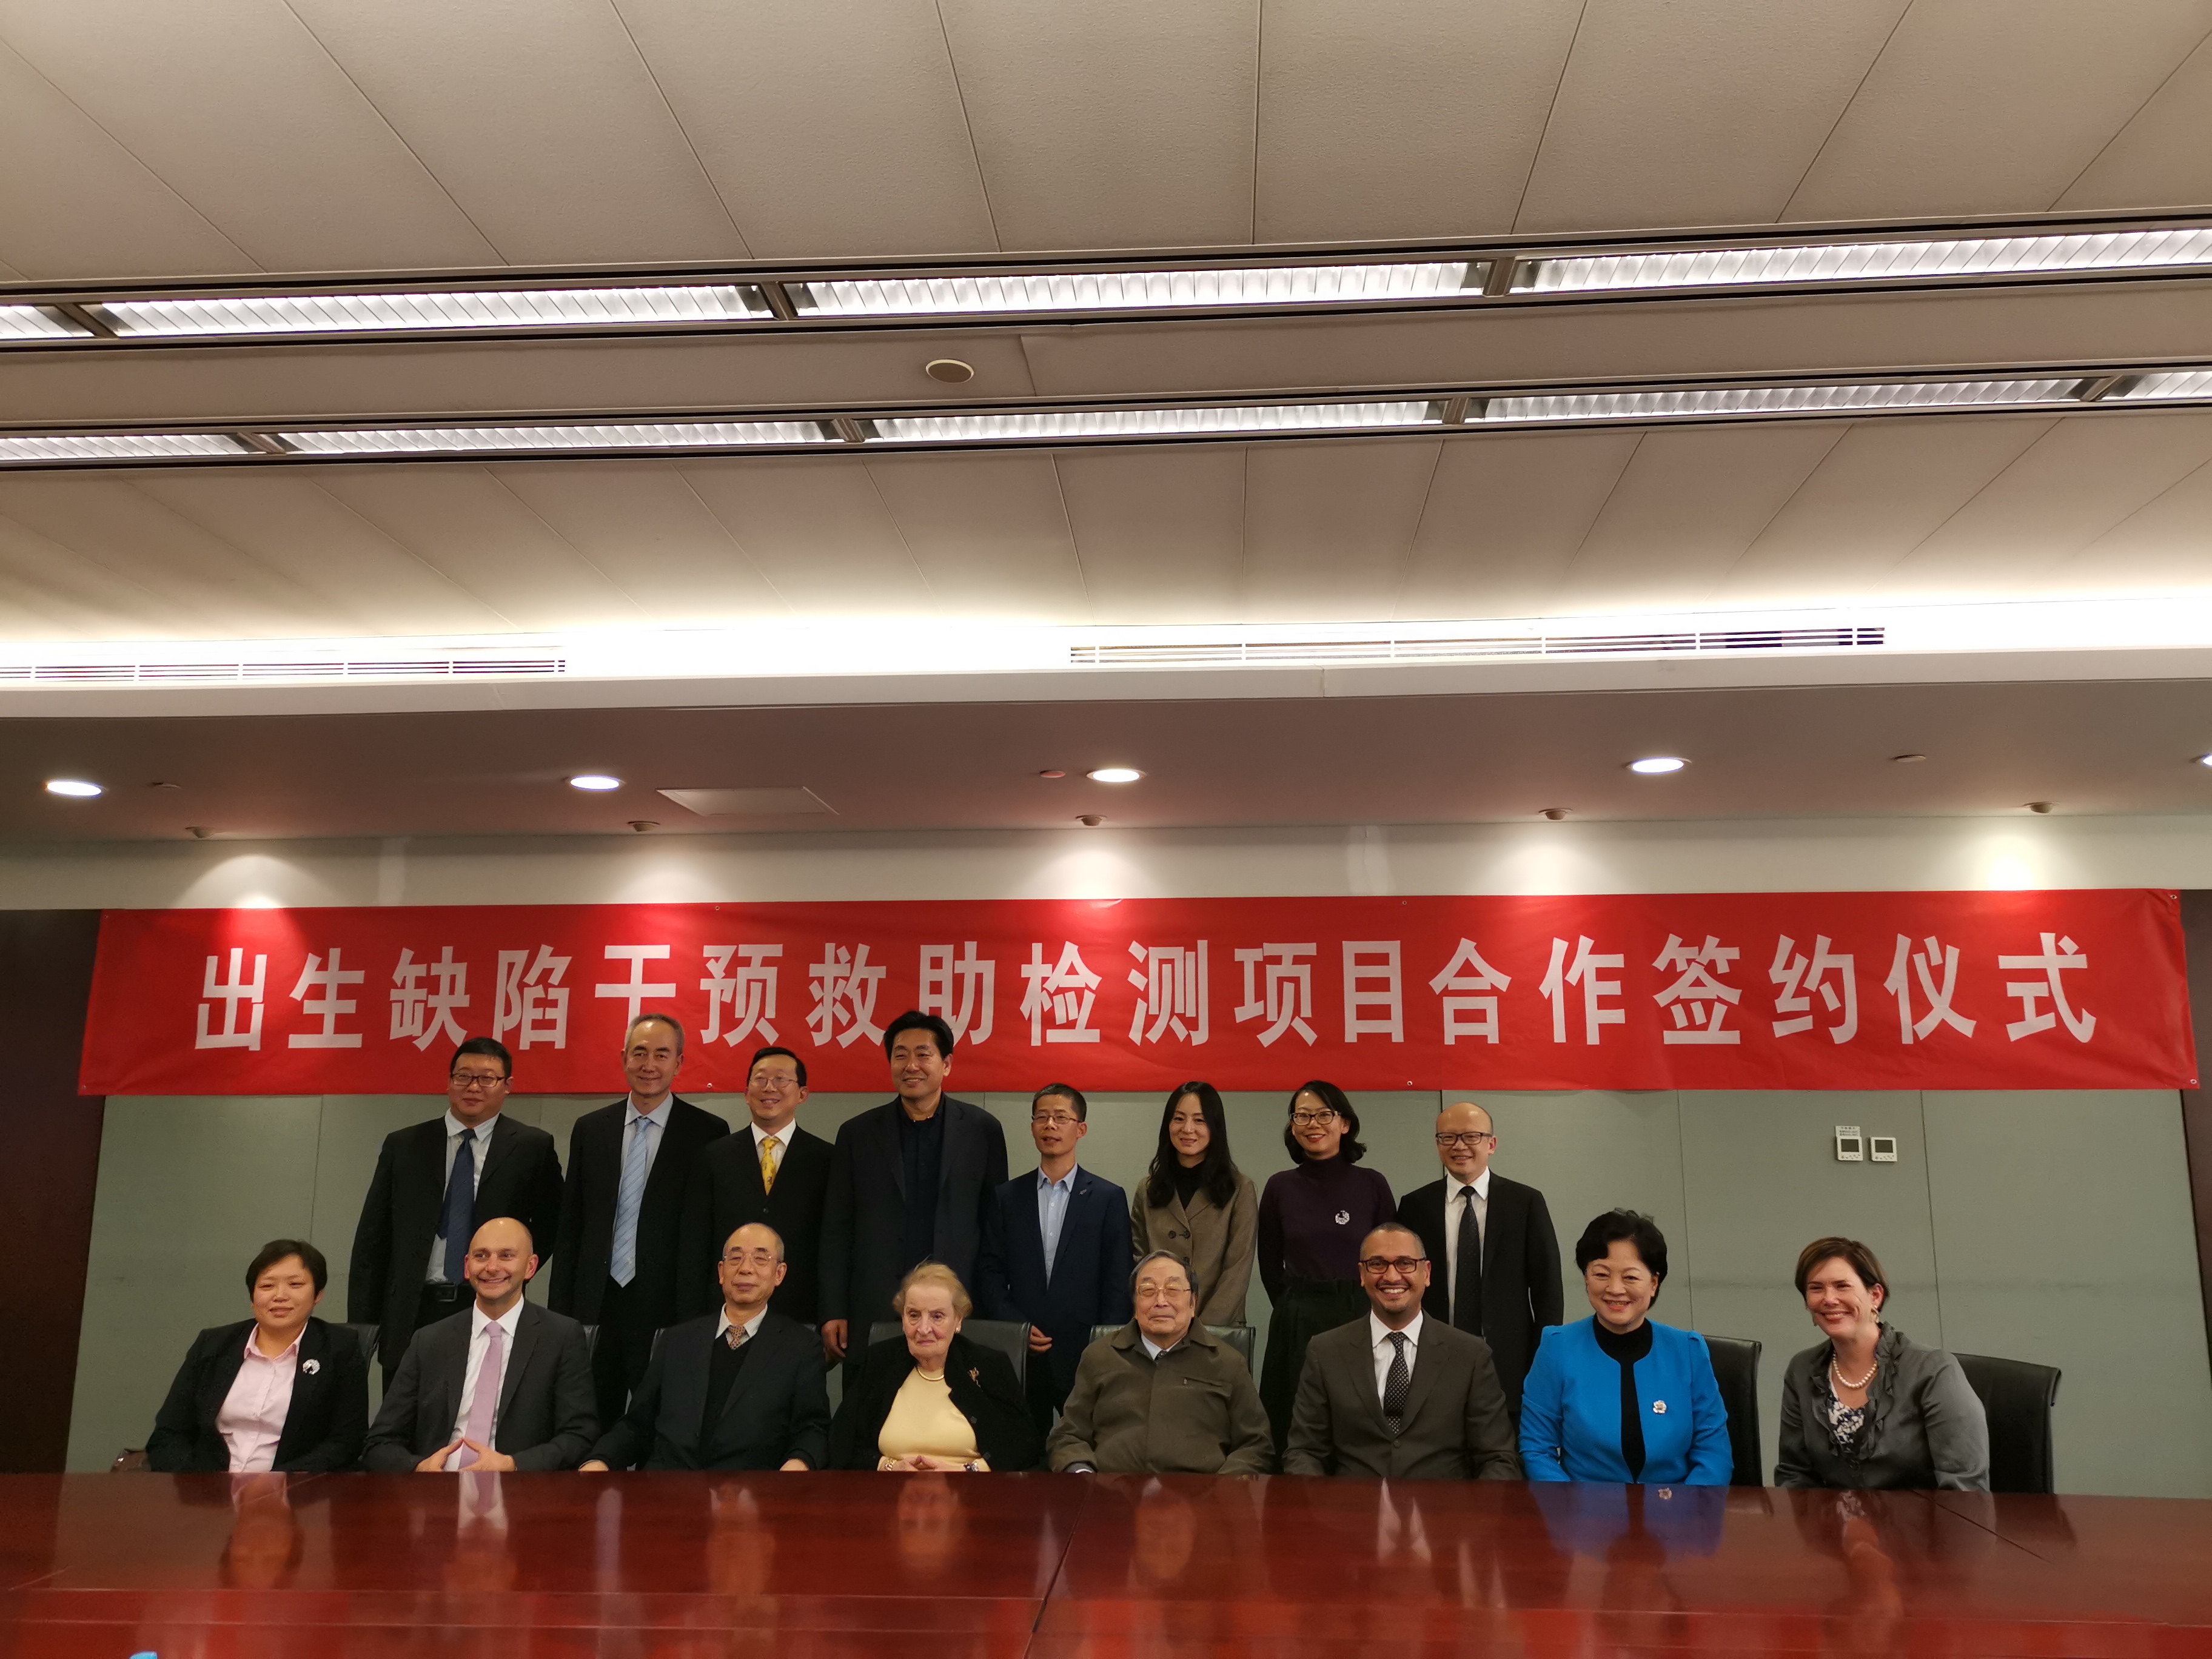 The March of Dimes Birth Defects Foundation of China Selects Illumina as Its Partner